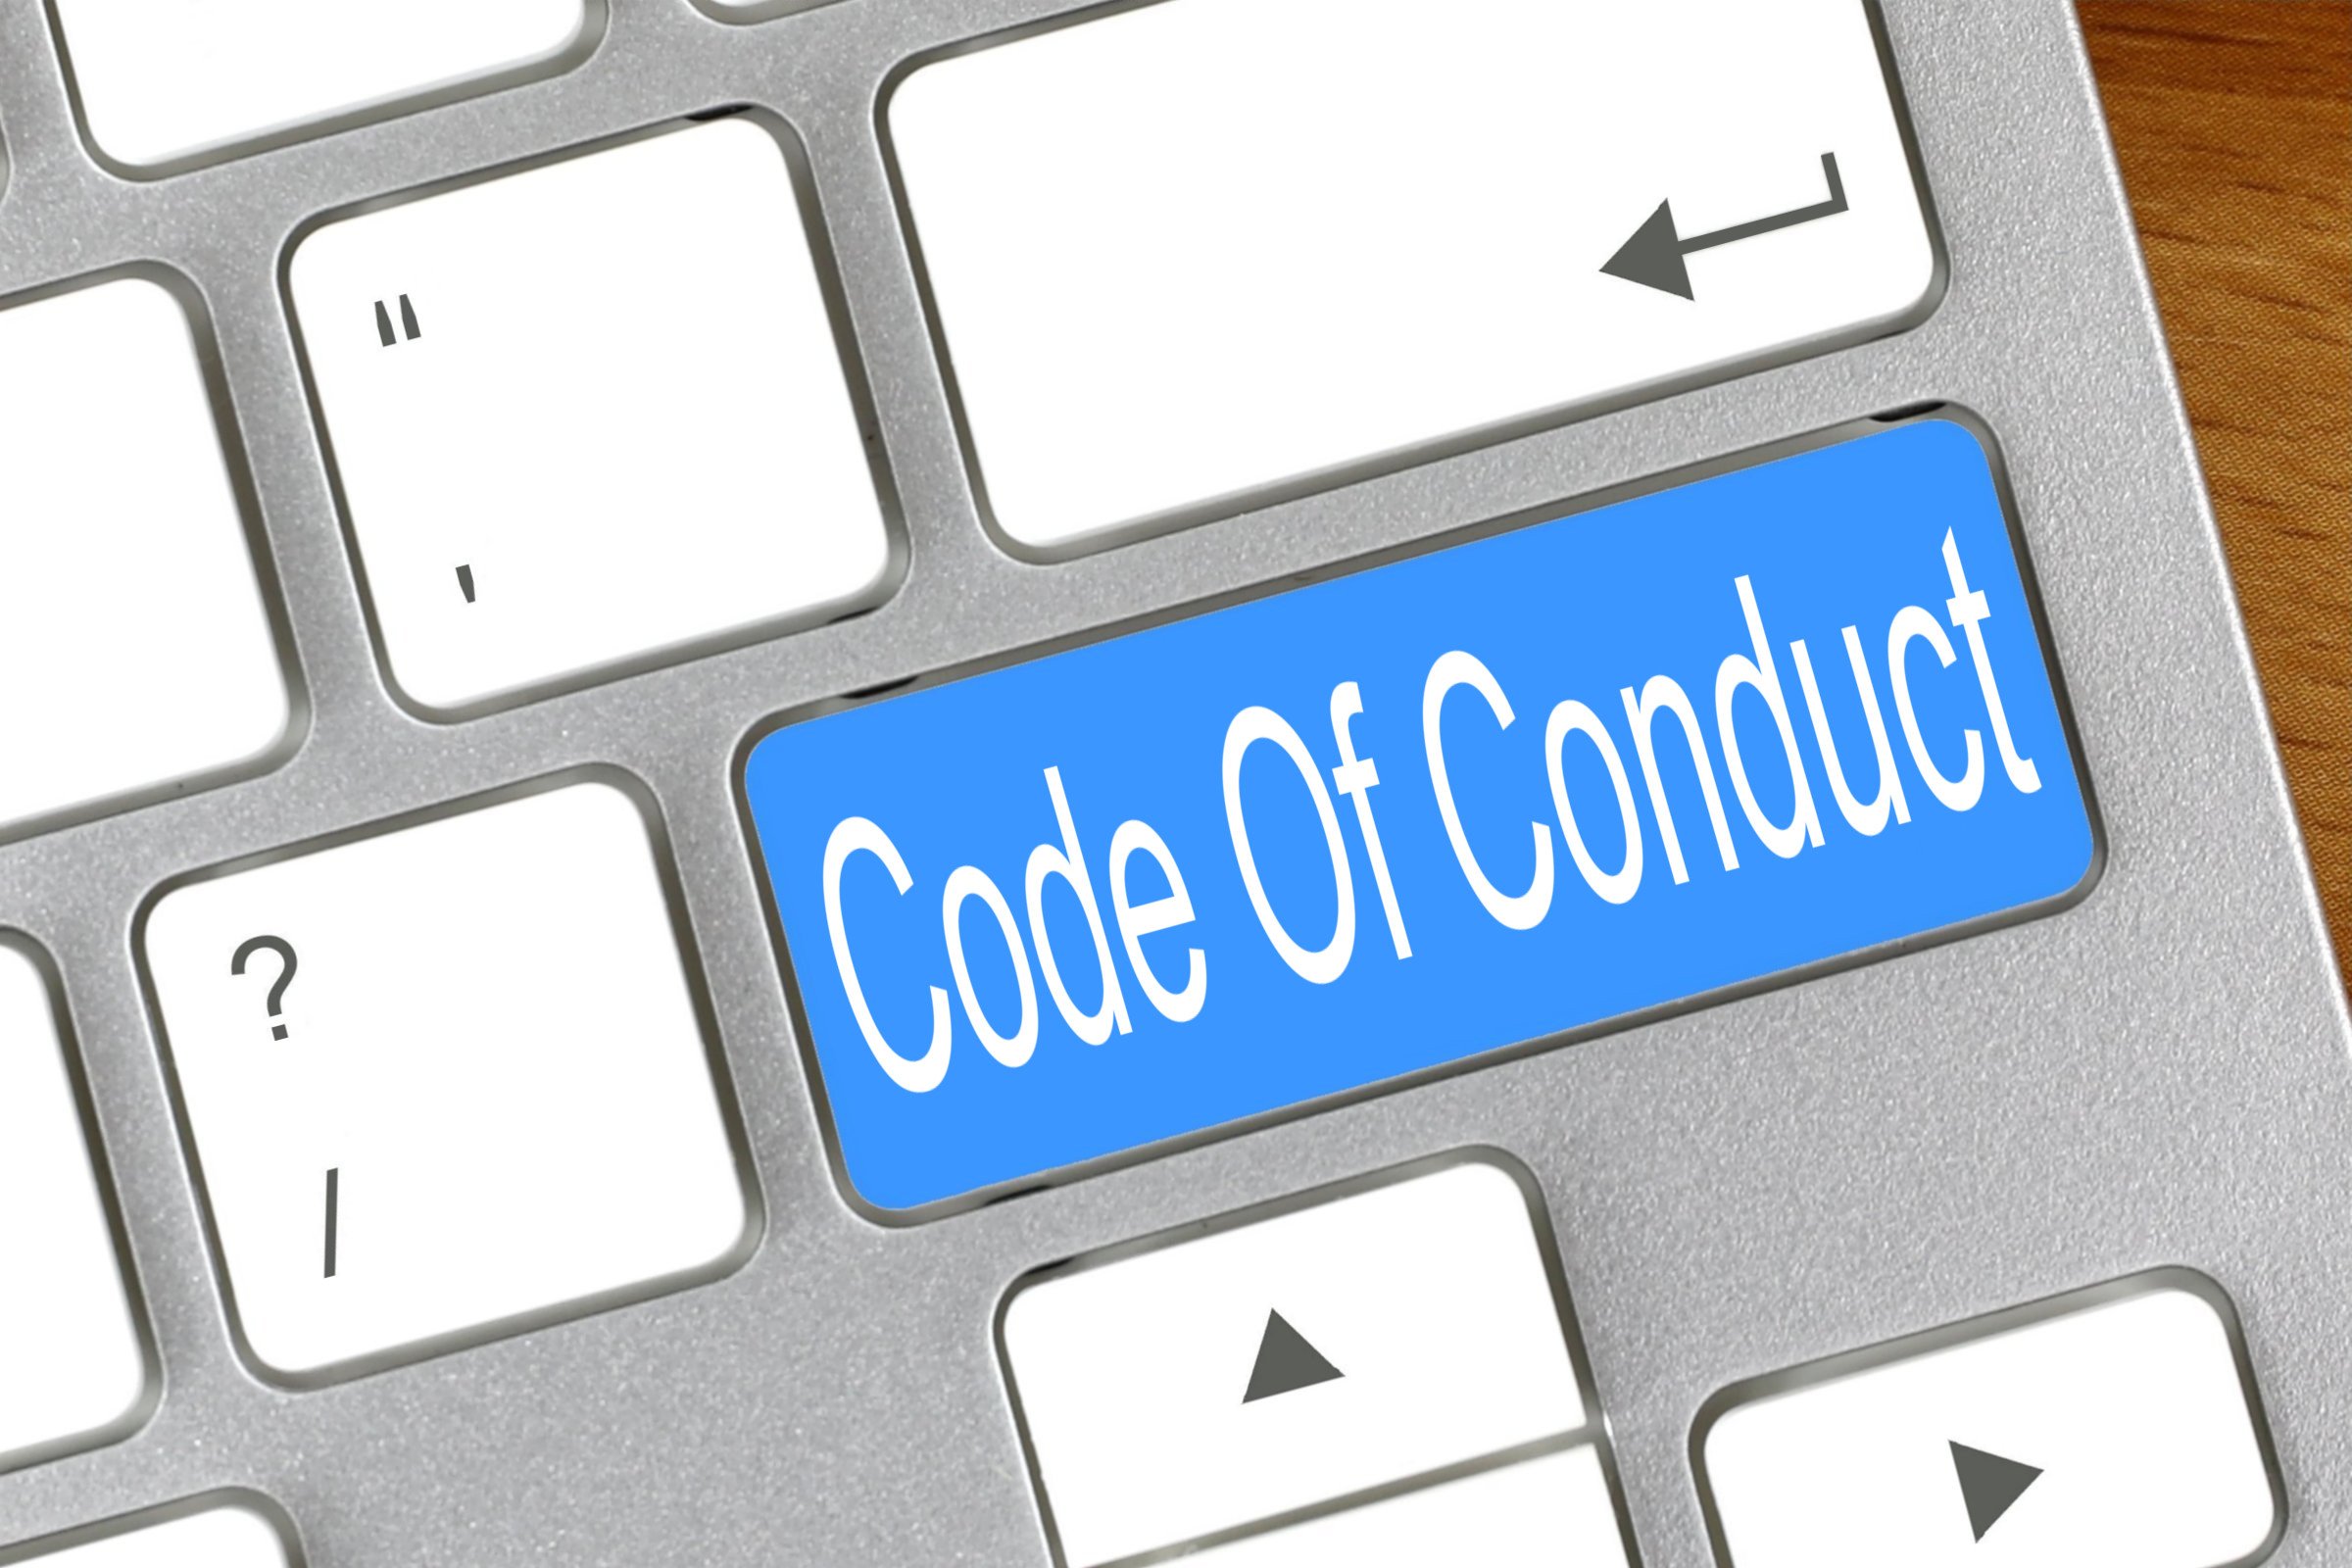 code of conduct